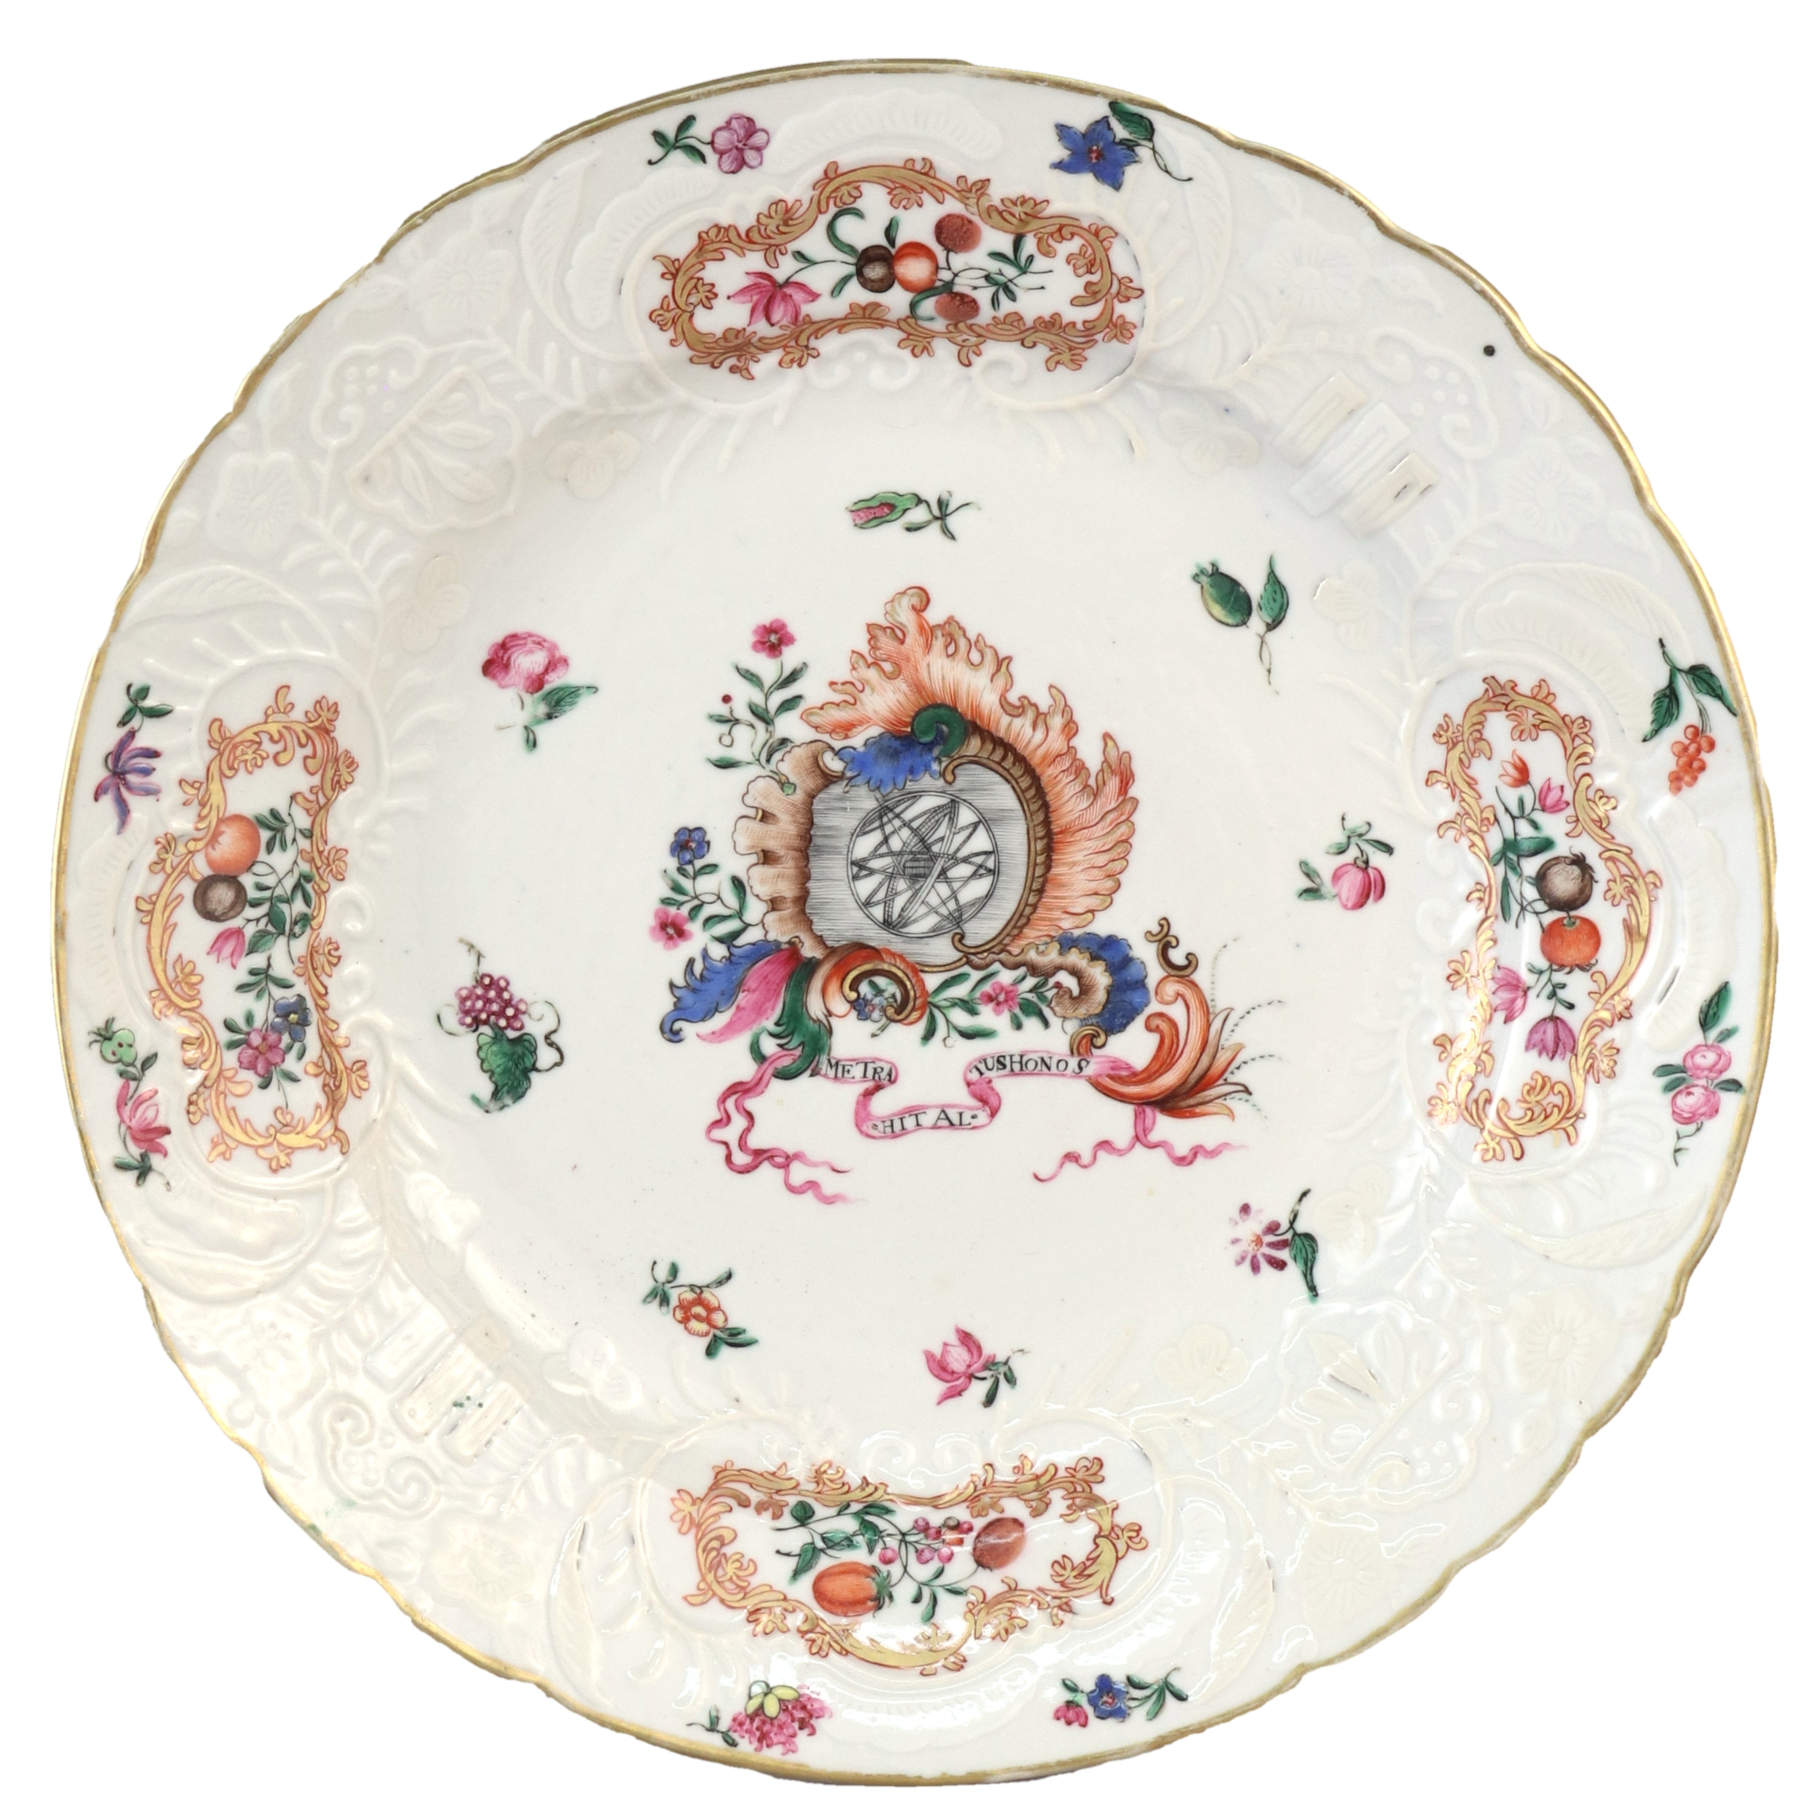 Chinese Export Porcelain Armorial Plate, c. 1760